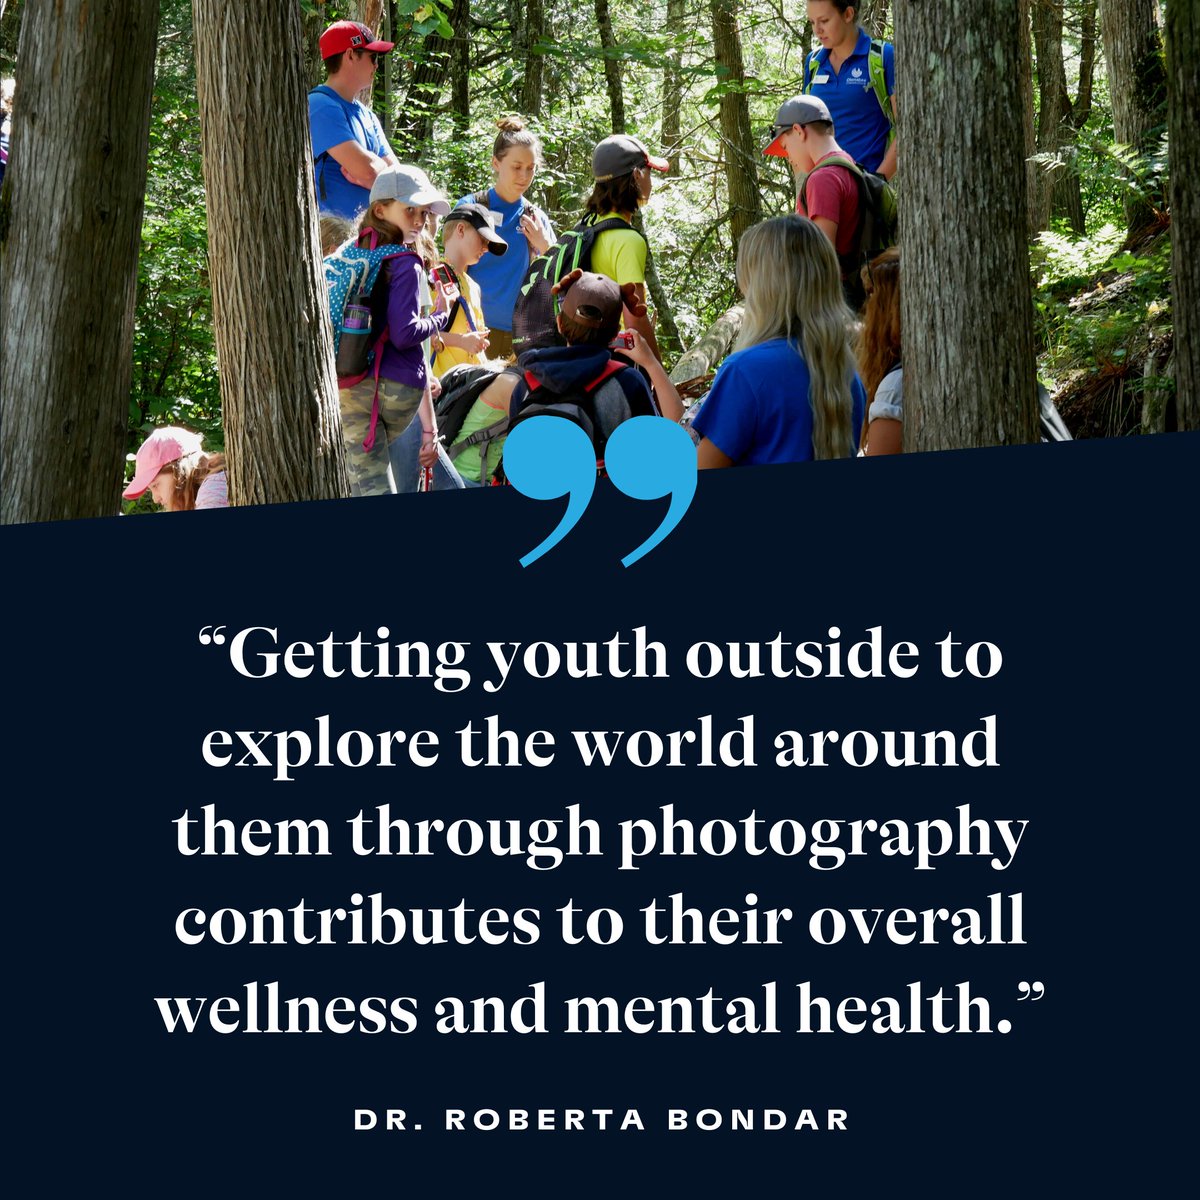 How does the #BondarChallenge relate to mental health? “Getting youth outside to explore the world around them through photography contributes to their overall wellness and mental health.” – @RobertaBondar